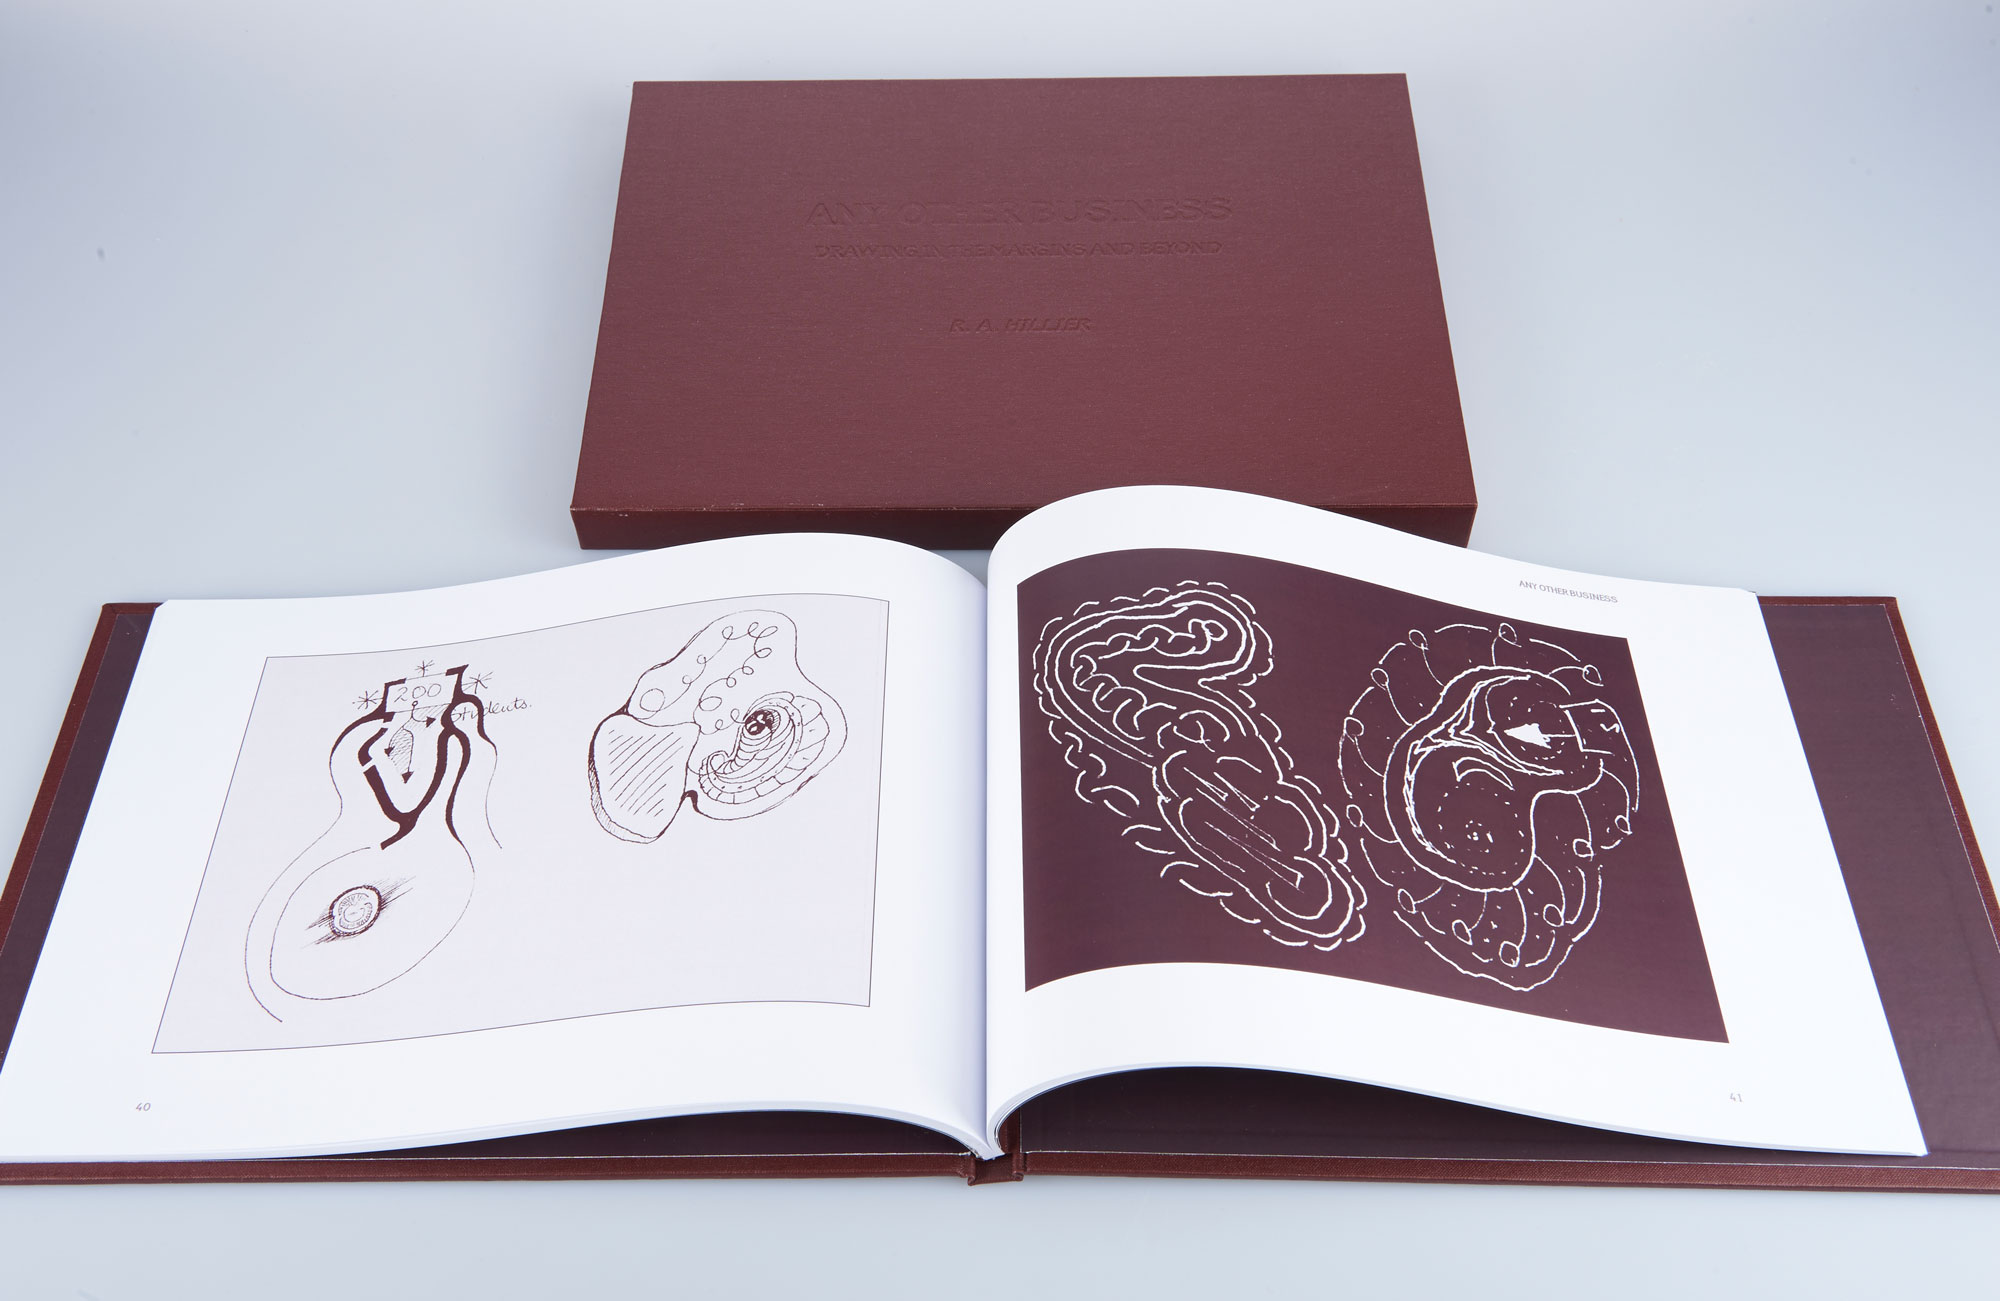 Photograph of the case bound front cover with dark brown cloth, then in front, the book open showing scientific cell illustrations on each page